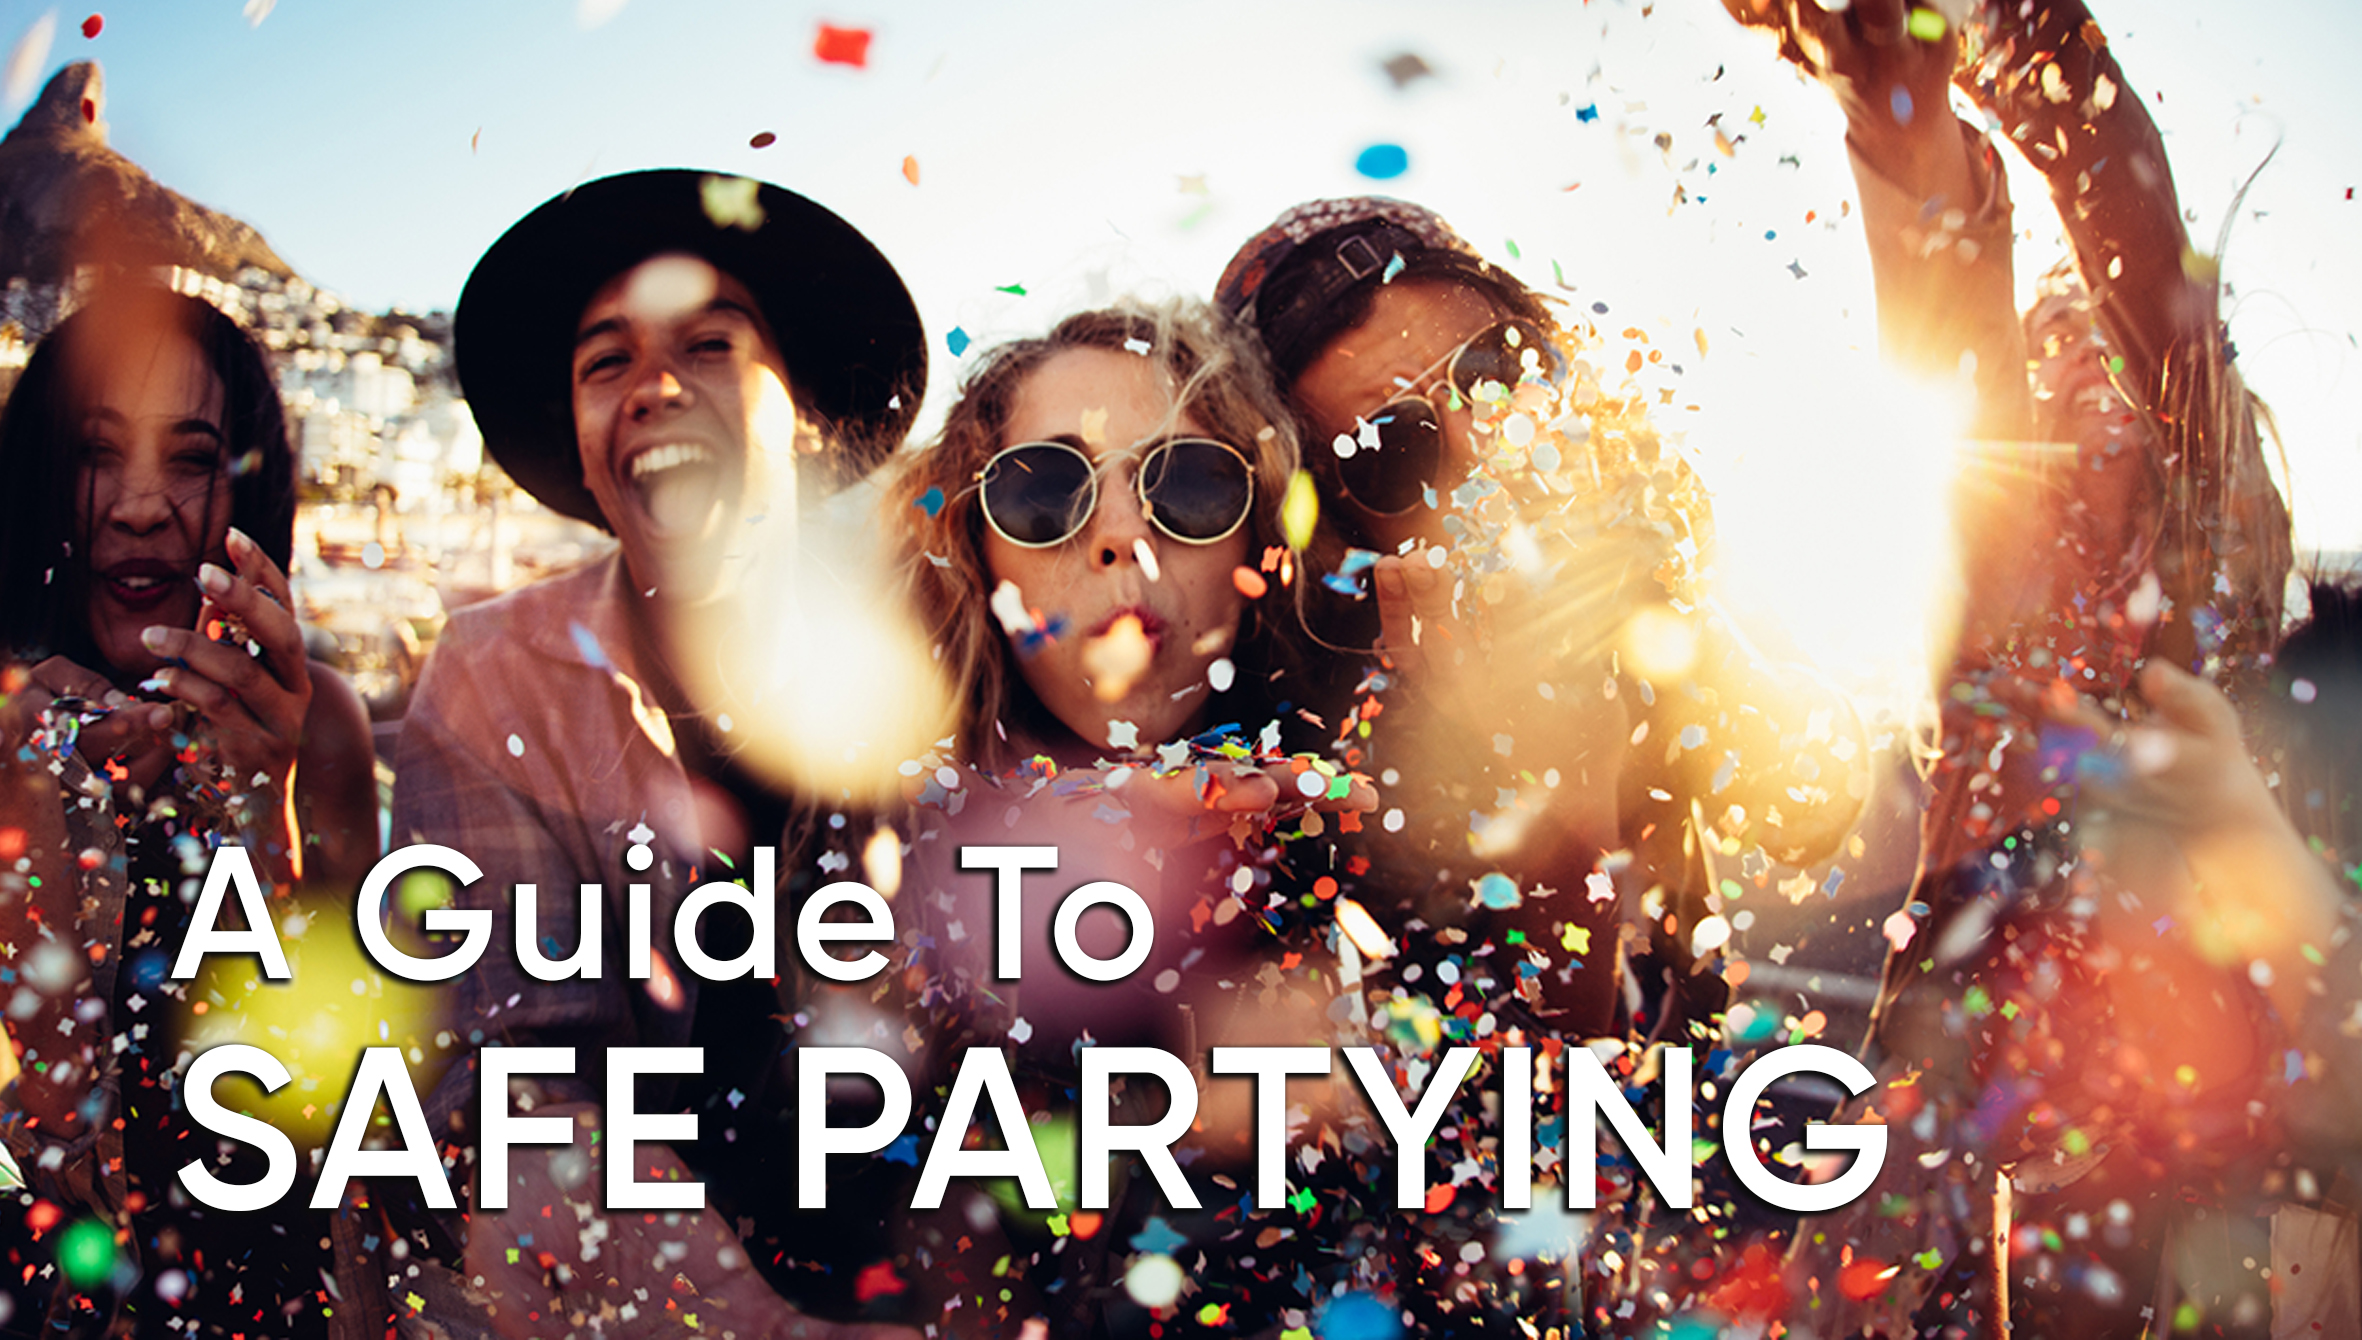 A Guide to Safe Partying